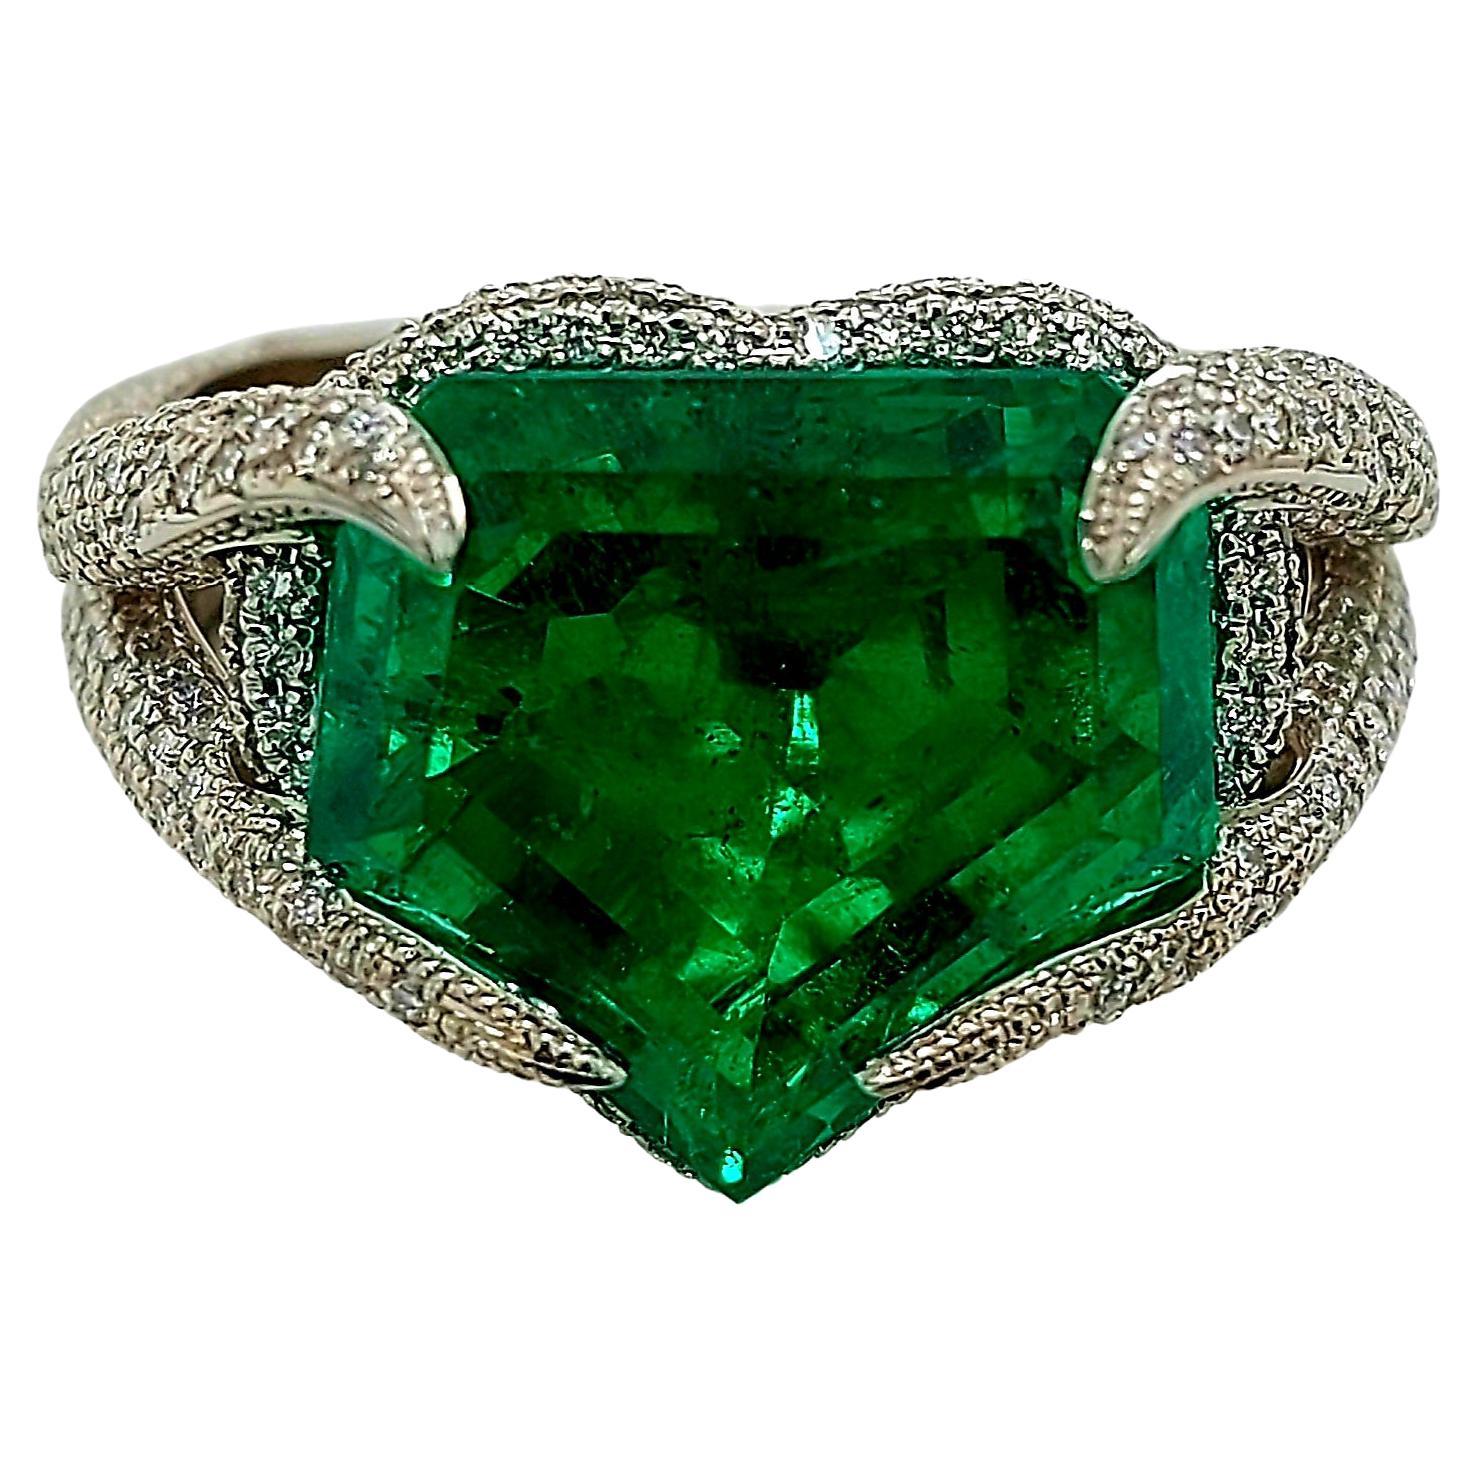 Magnificent Platinum 9.2 ct Colombian Emerald and Diamonds Unique Ring, With SSEF Certificate

Completely handmade, one of a kind

Emeralds are very difficult to photograph, actual stone is much nicer then on pictures.  

Emerald: Kite Shaped, Step